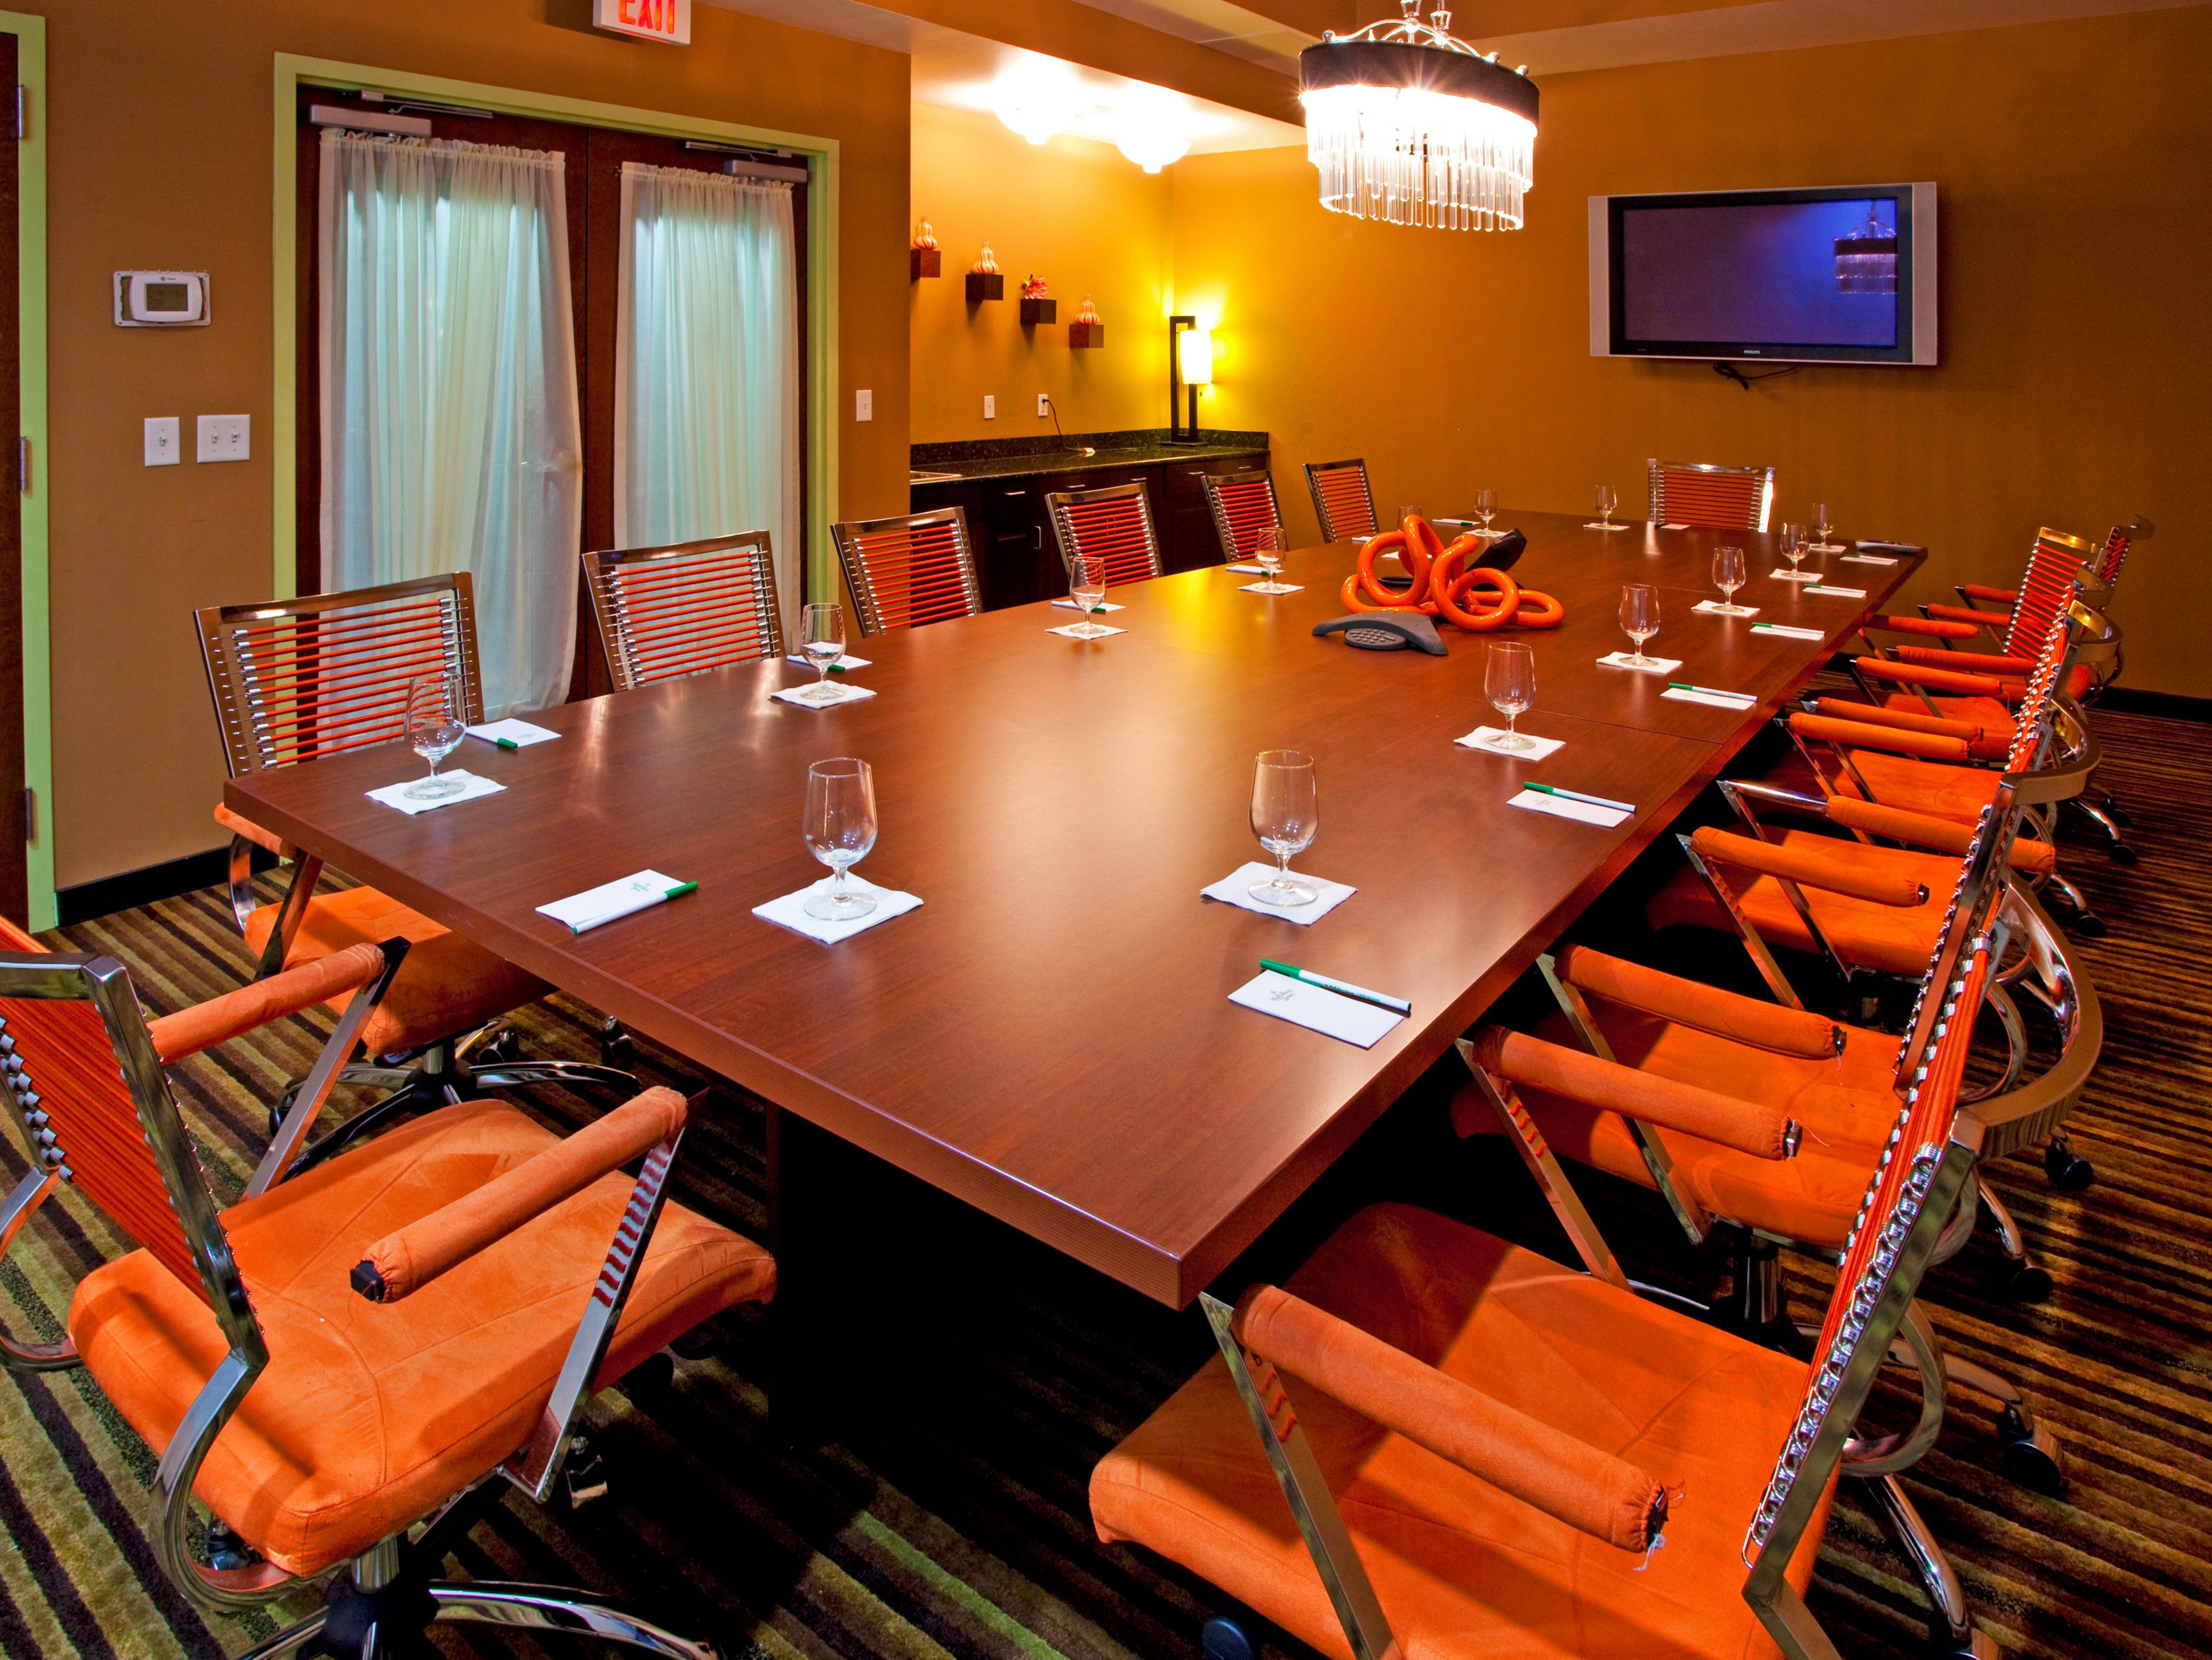 Whether you're booking a family reunion or a corporate event, we make planning your next meeting easier than ever.  We offer the largest meeting space in Ocala, FL, with over 11,000 sq ft of flexible space, plenty of comfortable guest rooms, and a full-service catering team onsite.